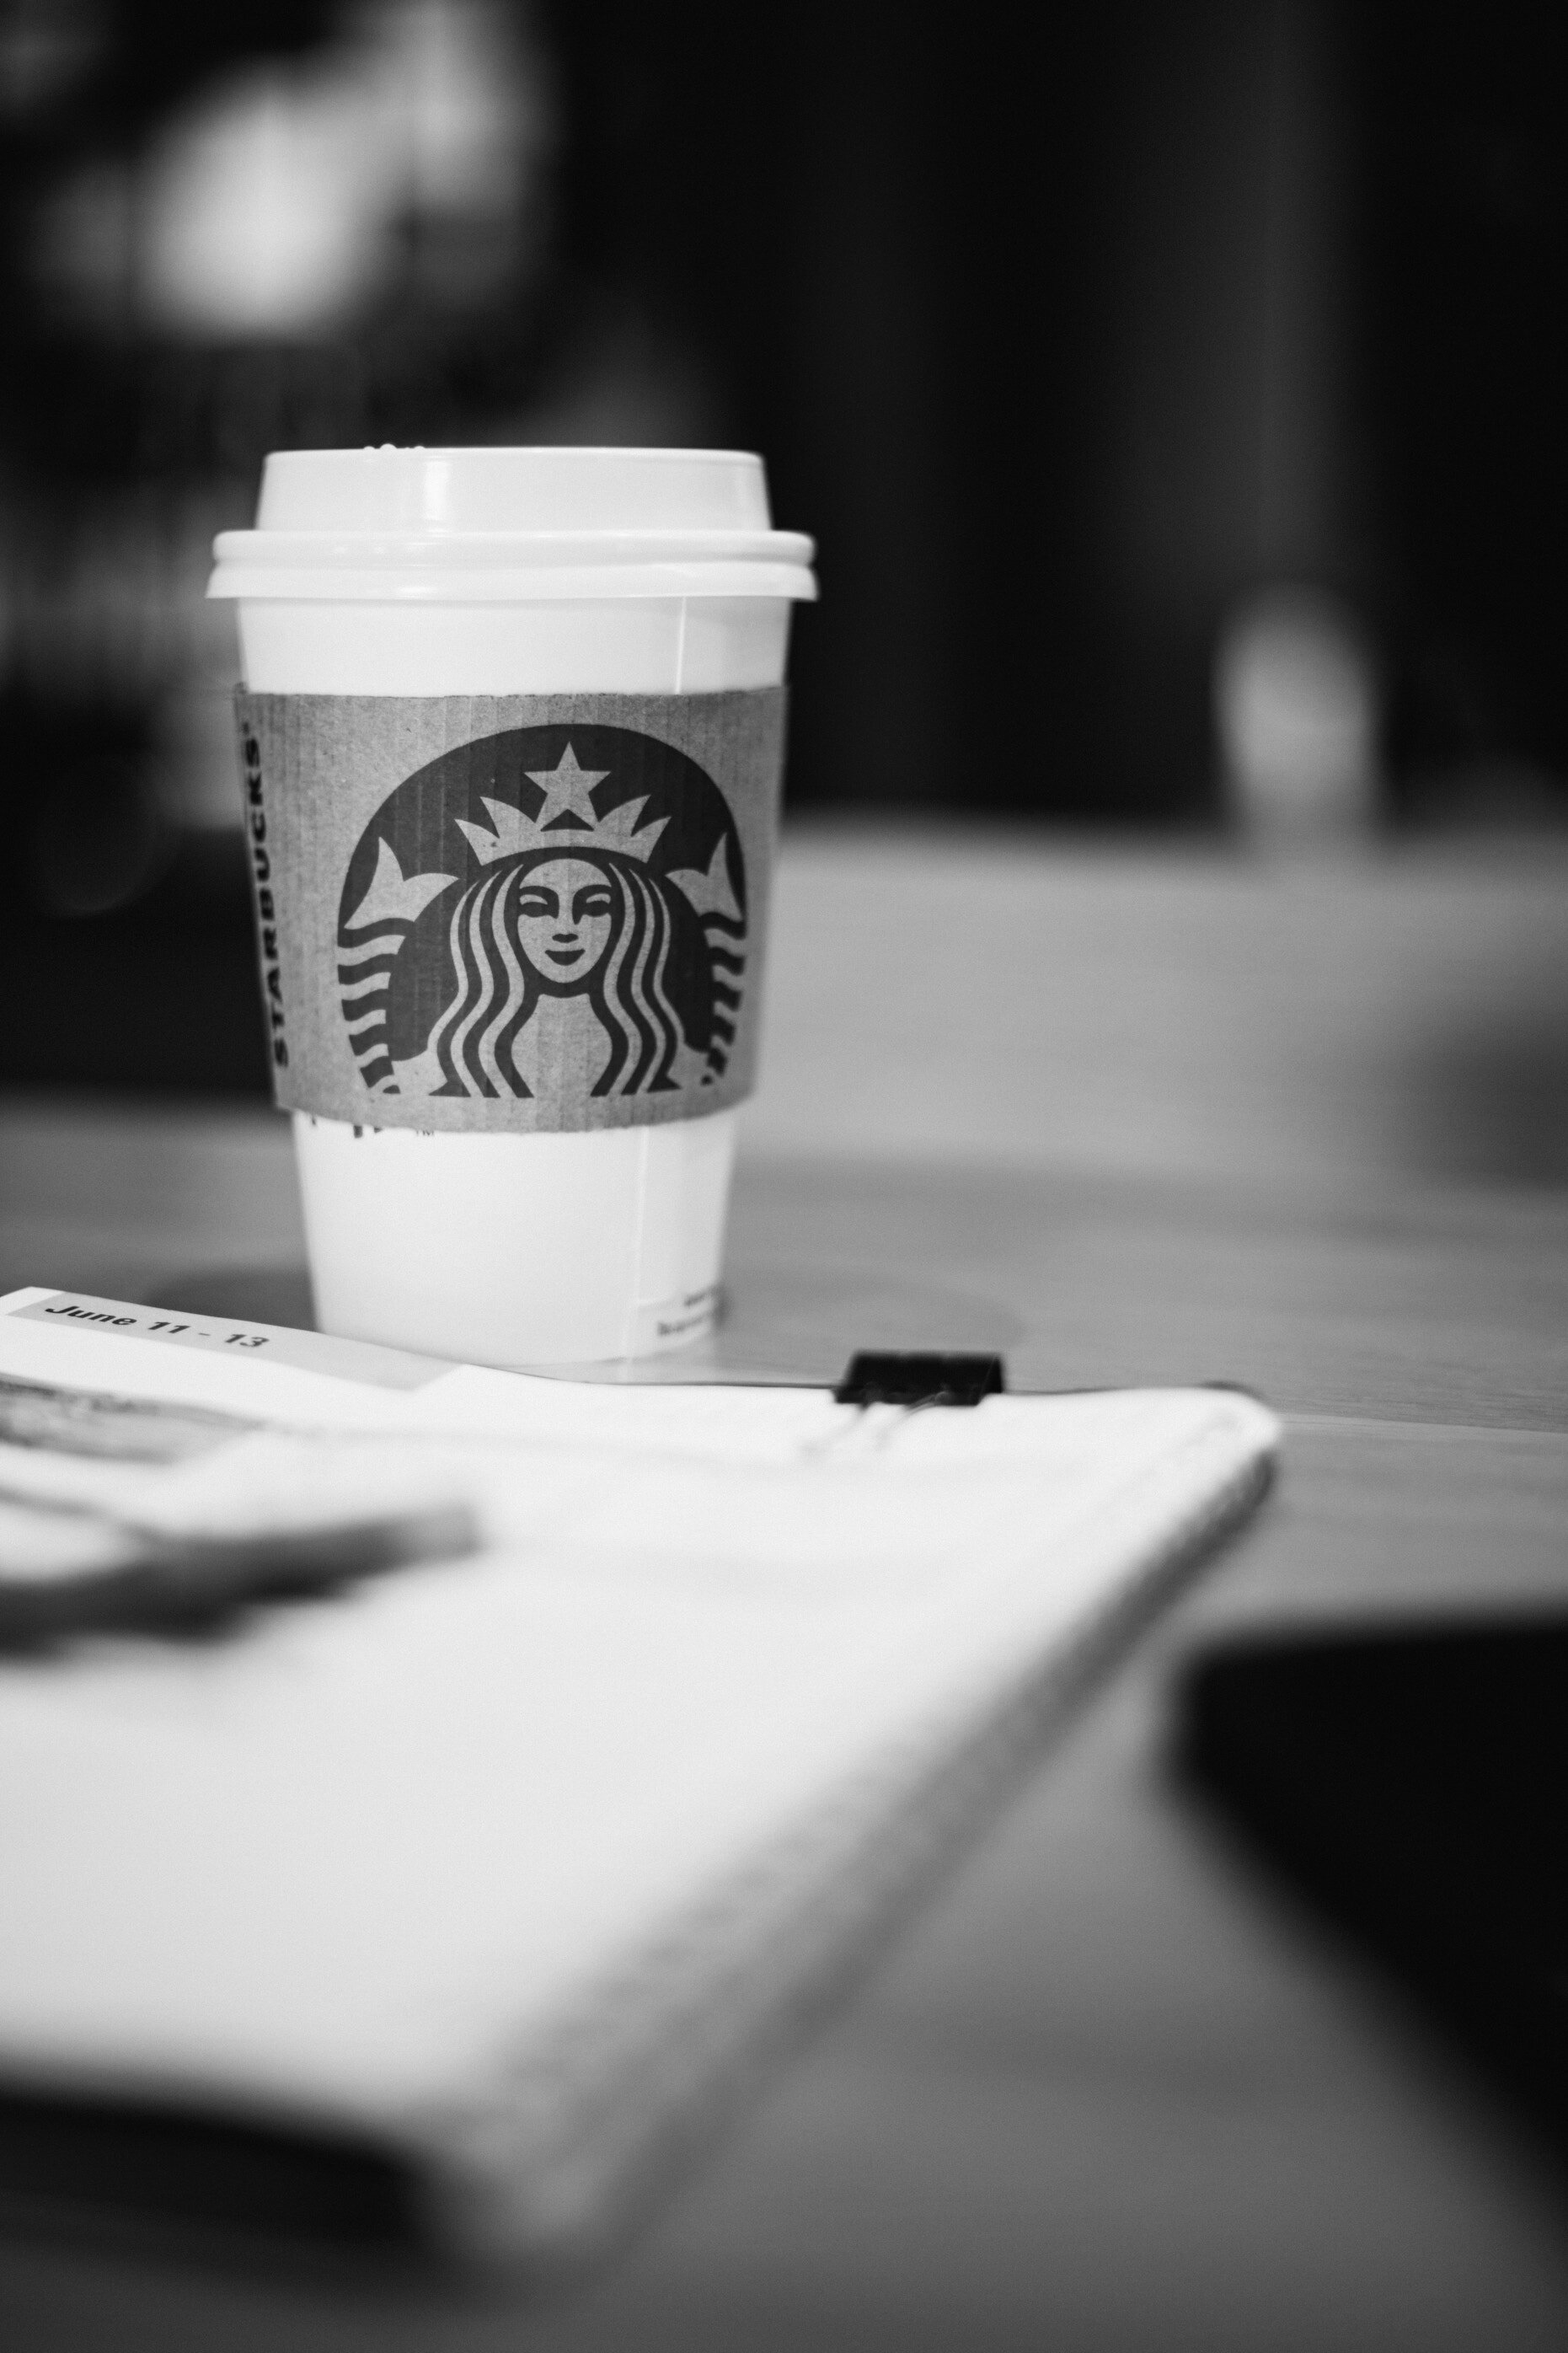 A white Starbucks disposable coffee cup with cardboard sleeve sits on a table